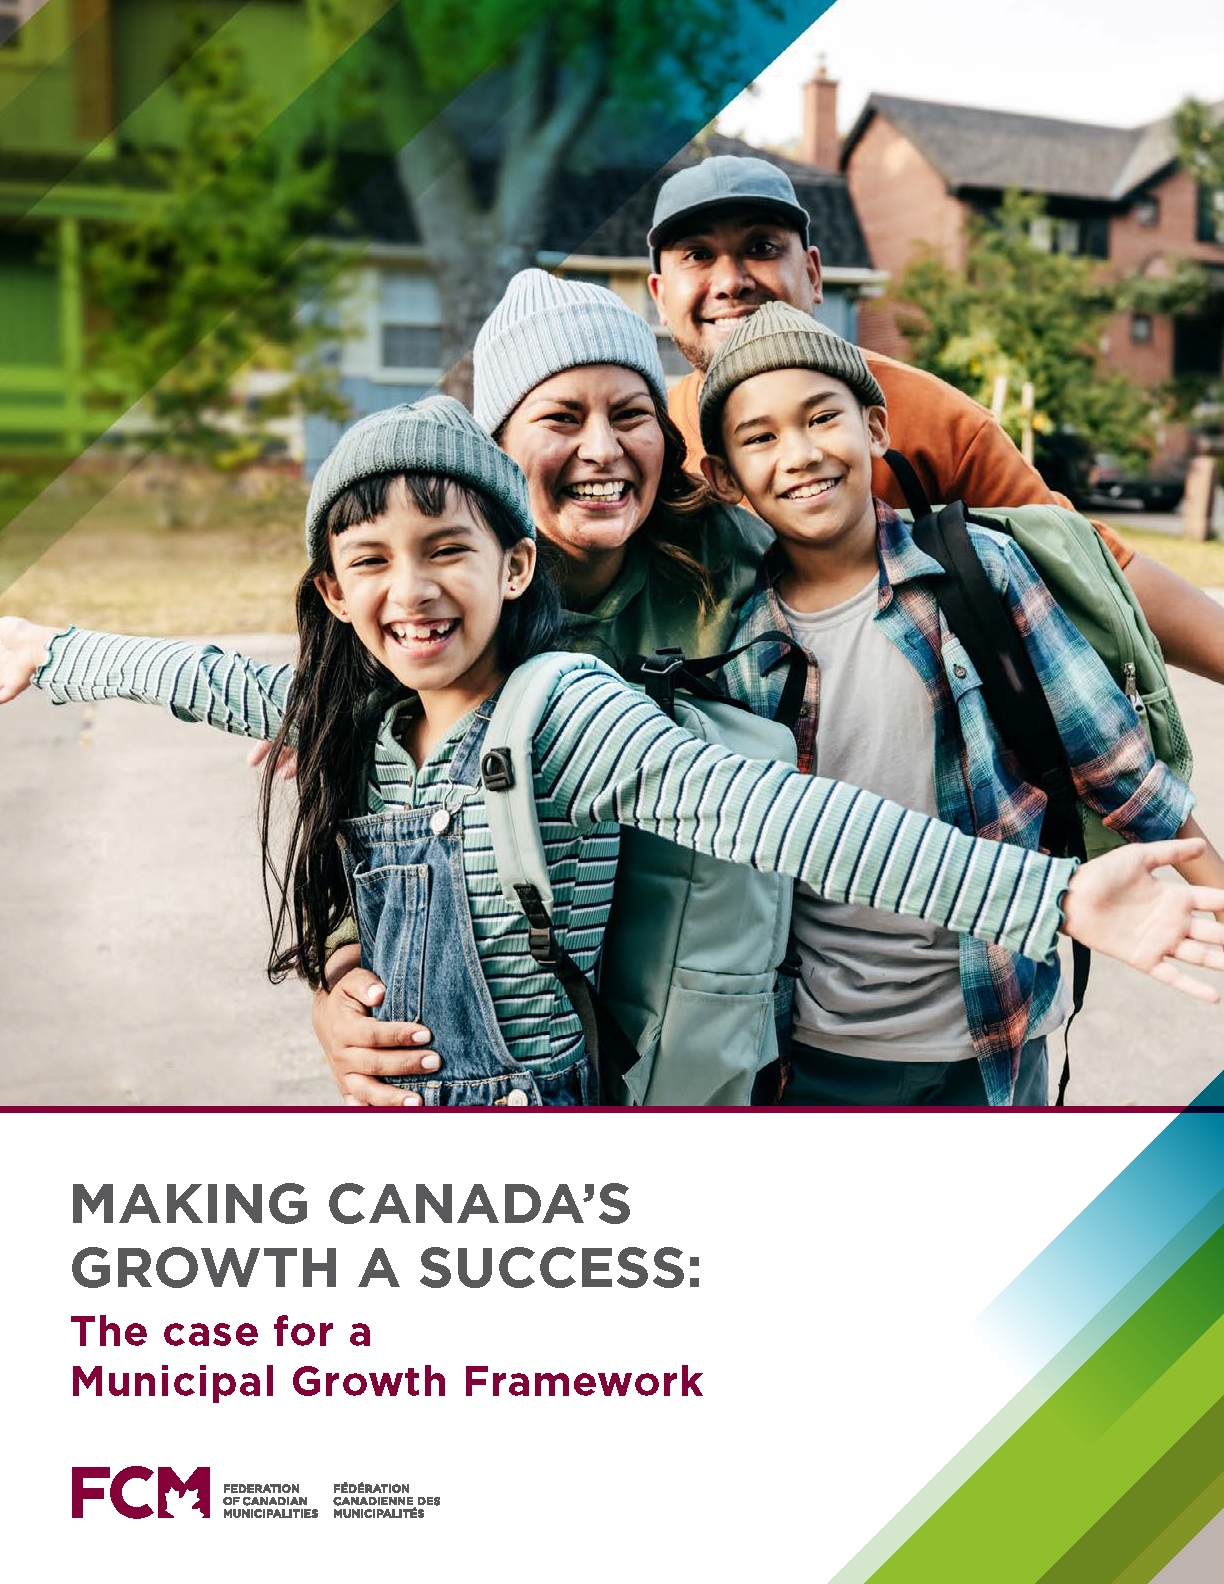 Making Canada's growth a success